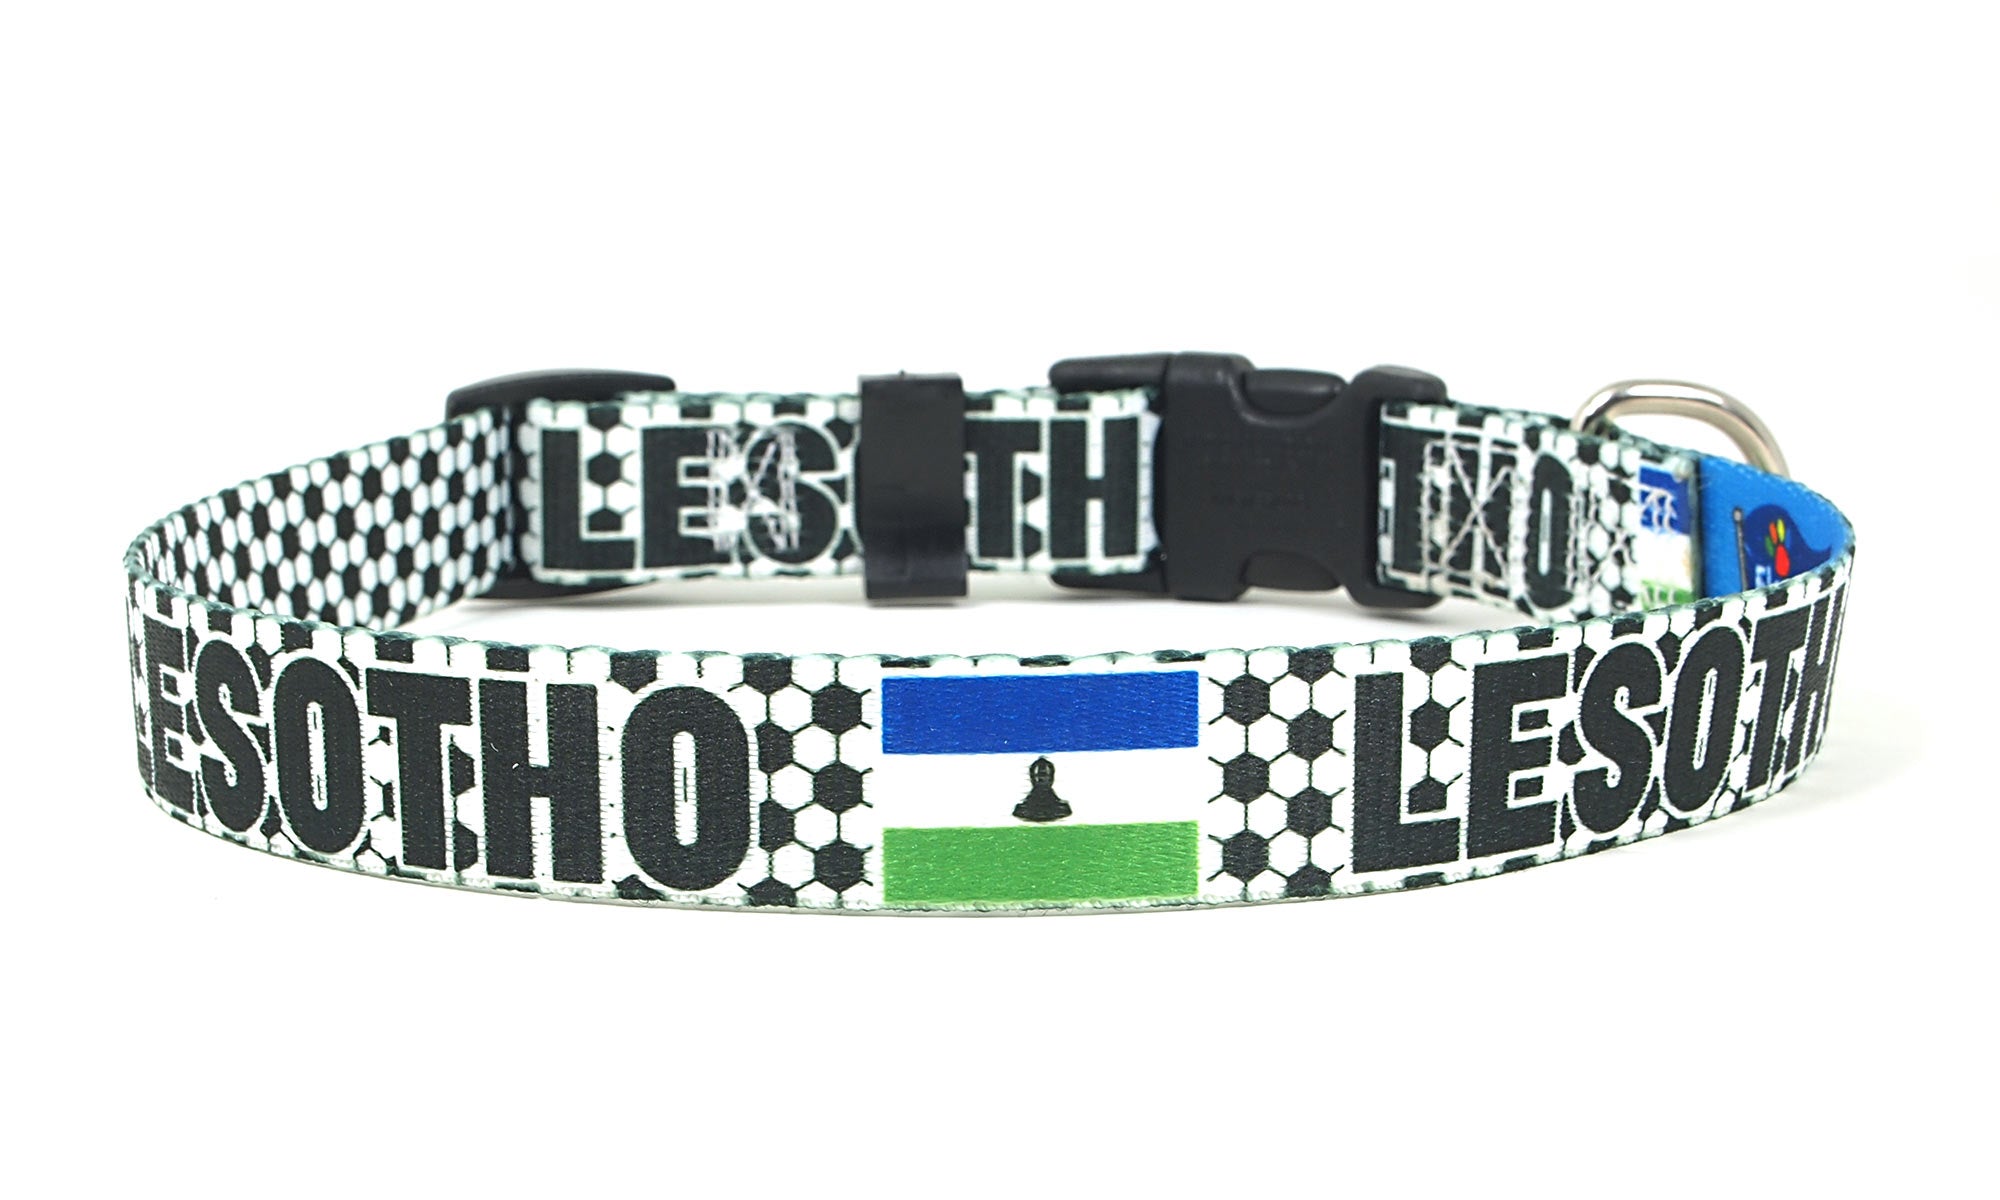 Lesotho Dog Collar for Soccer Fans | Black or Pink | Quick Release or Martingale Style | Made in NJ, USA